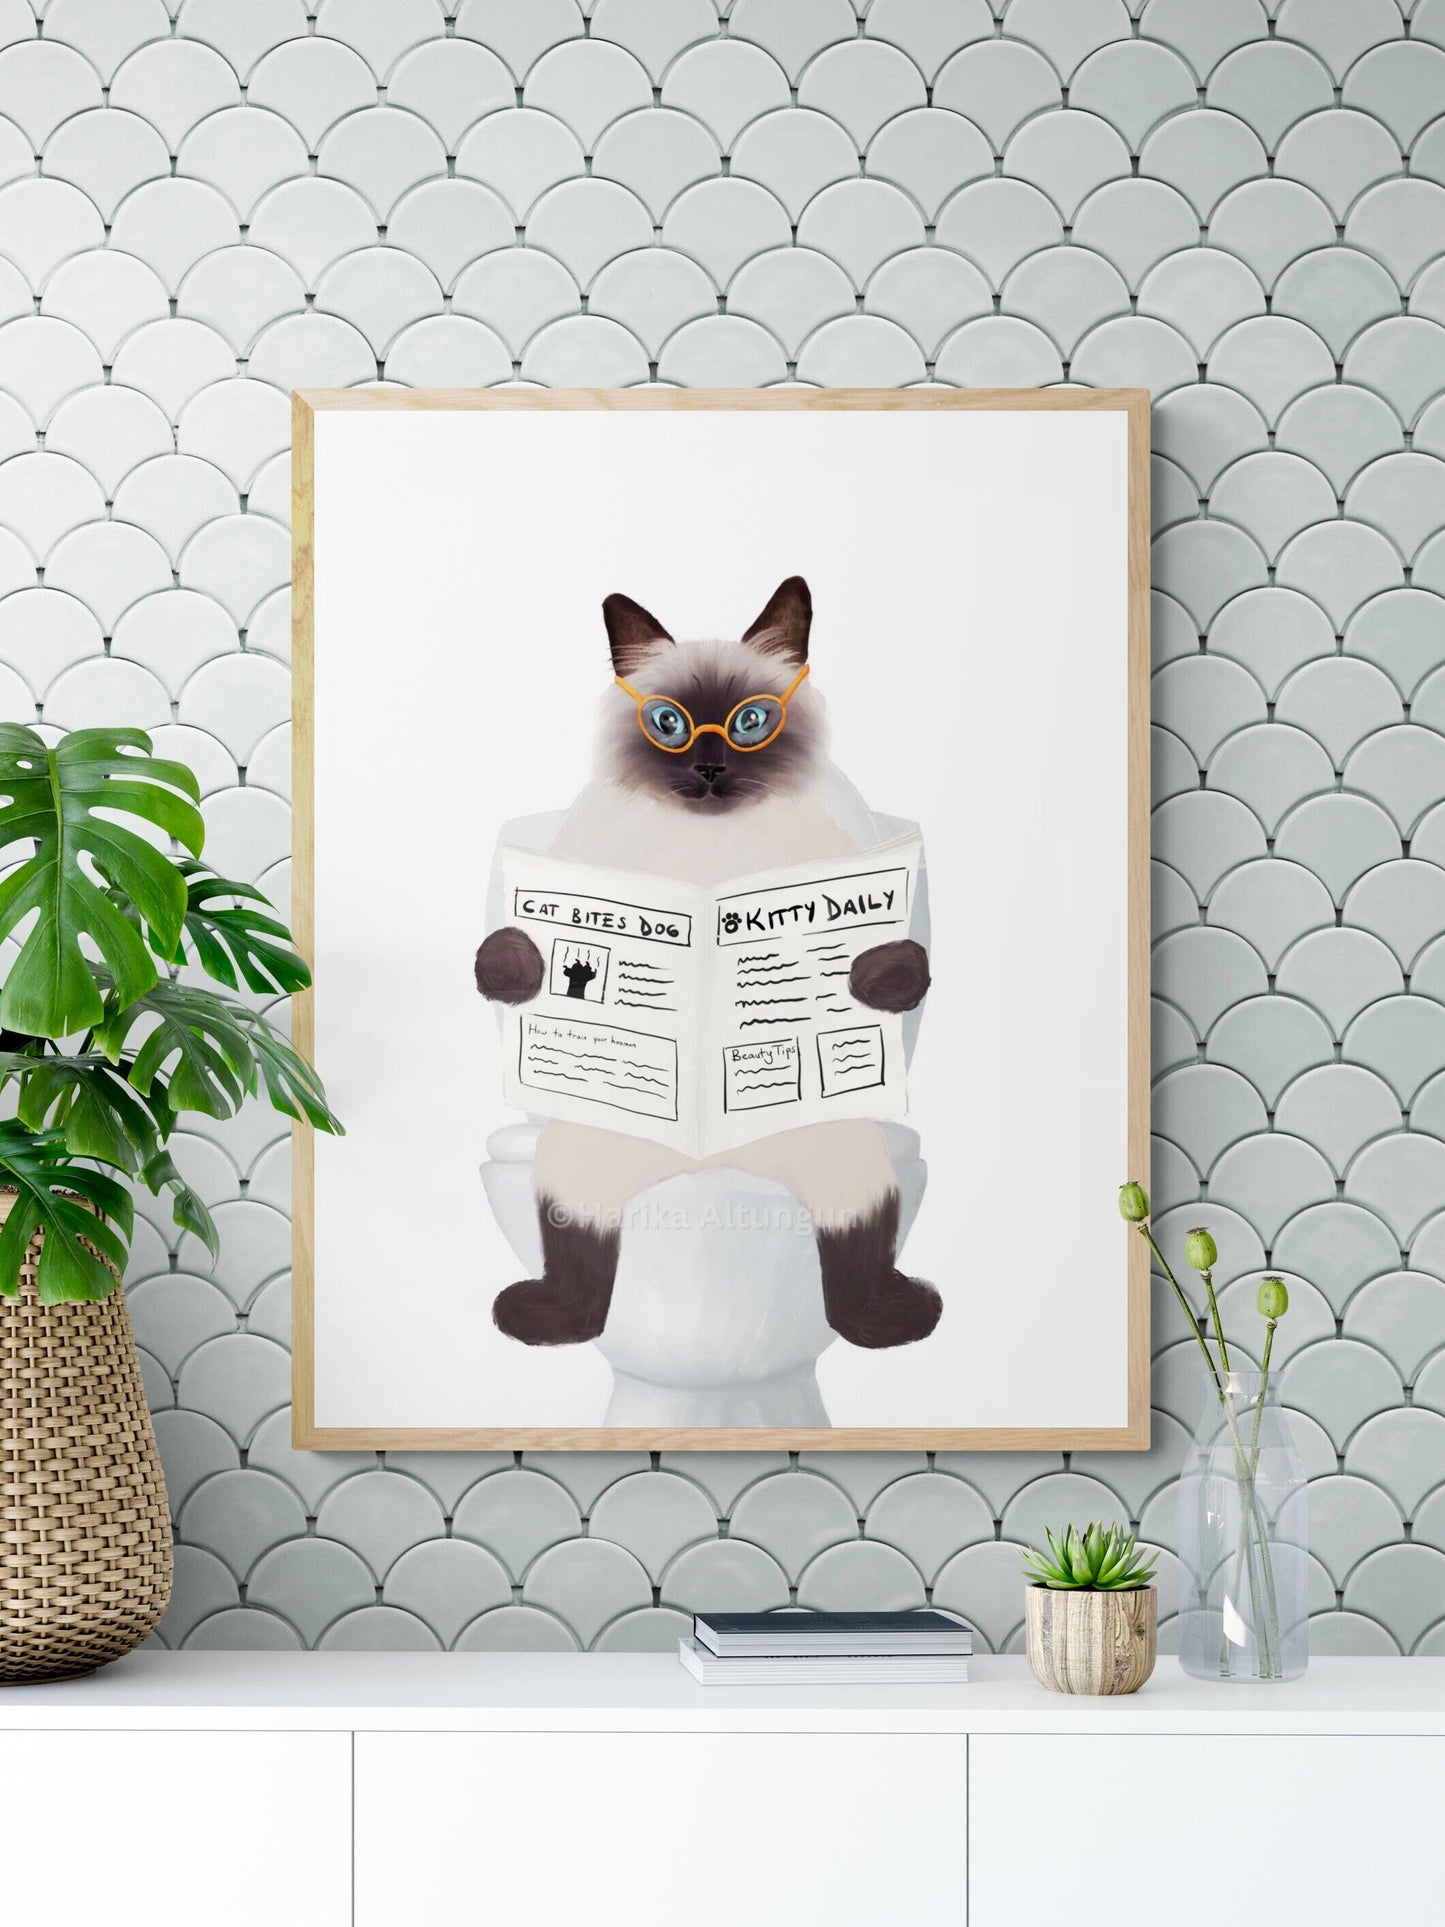 Himalayan Cat On Toilet Print ,Funny Bathroom Decor, Bathroom Cat Painting, Unique Cat Artwork, Cat Lover Gift, Cat Mom Gift